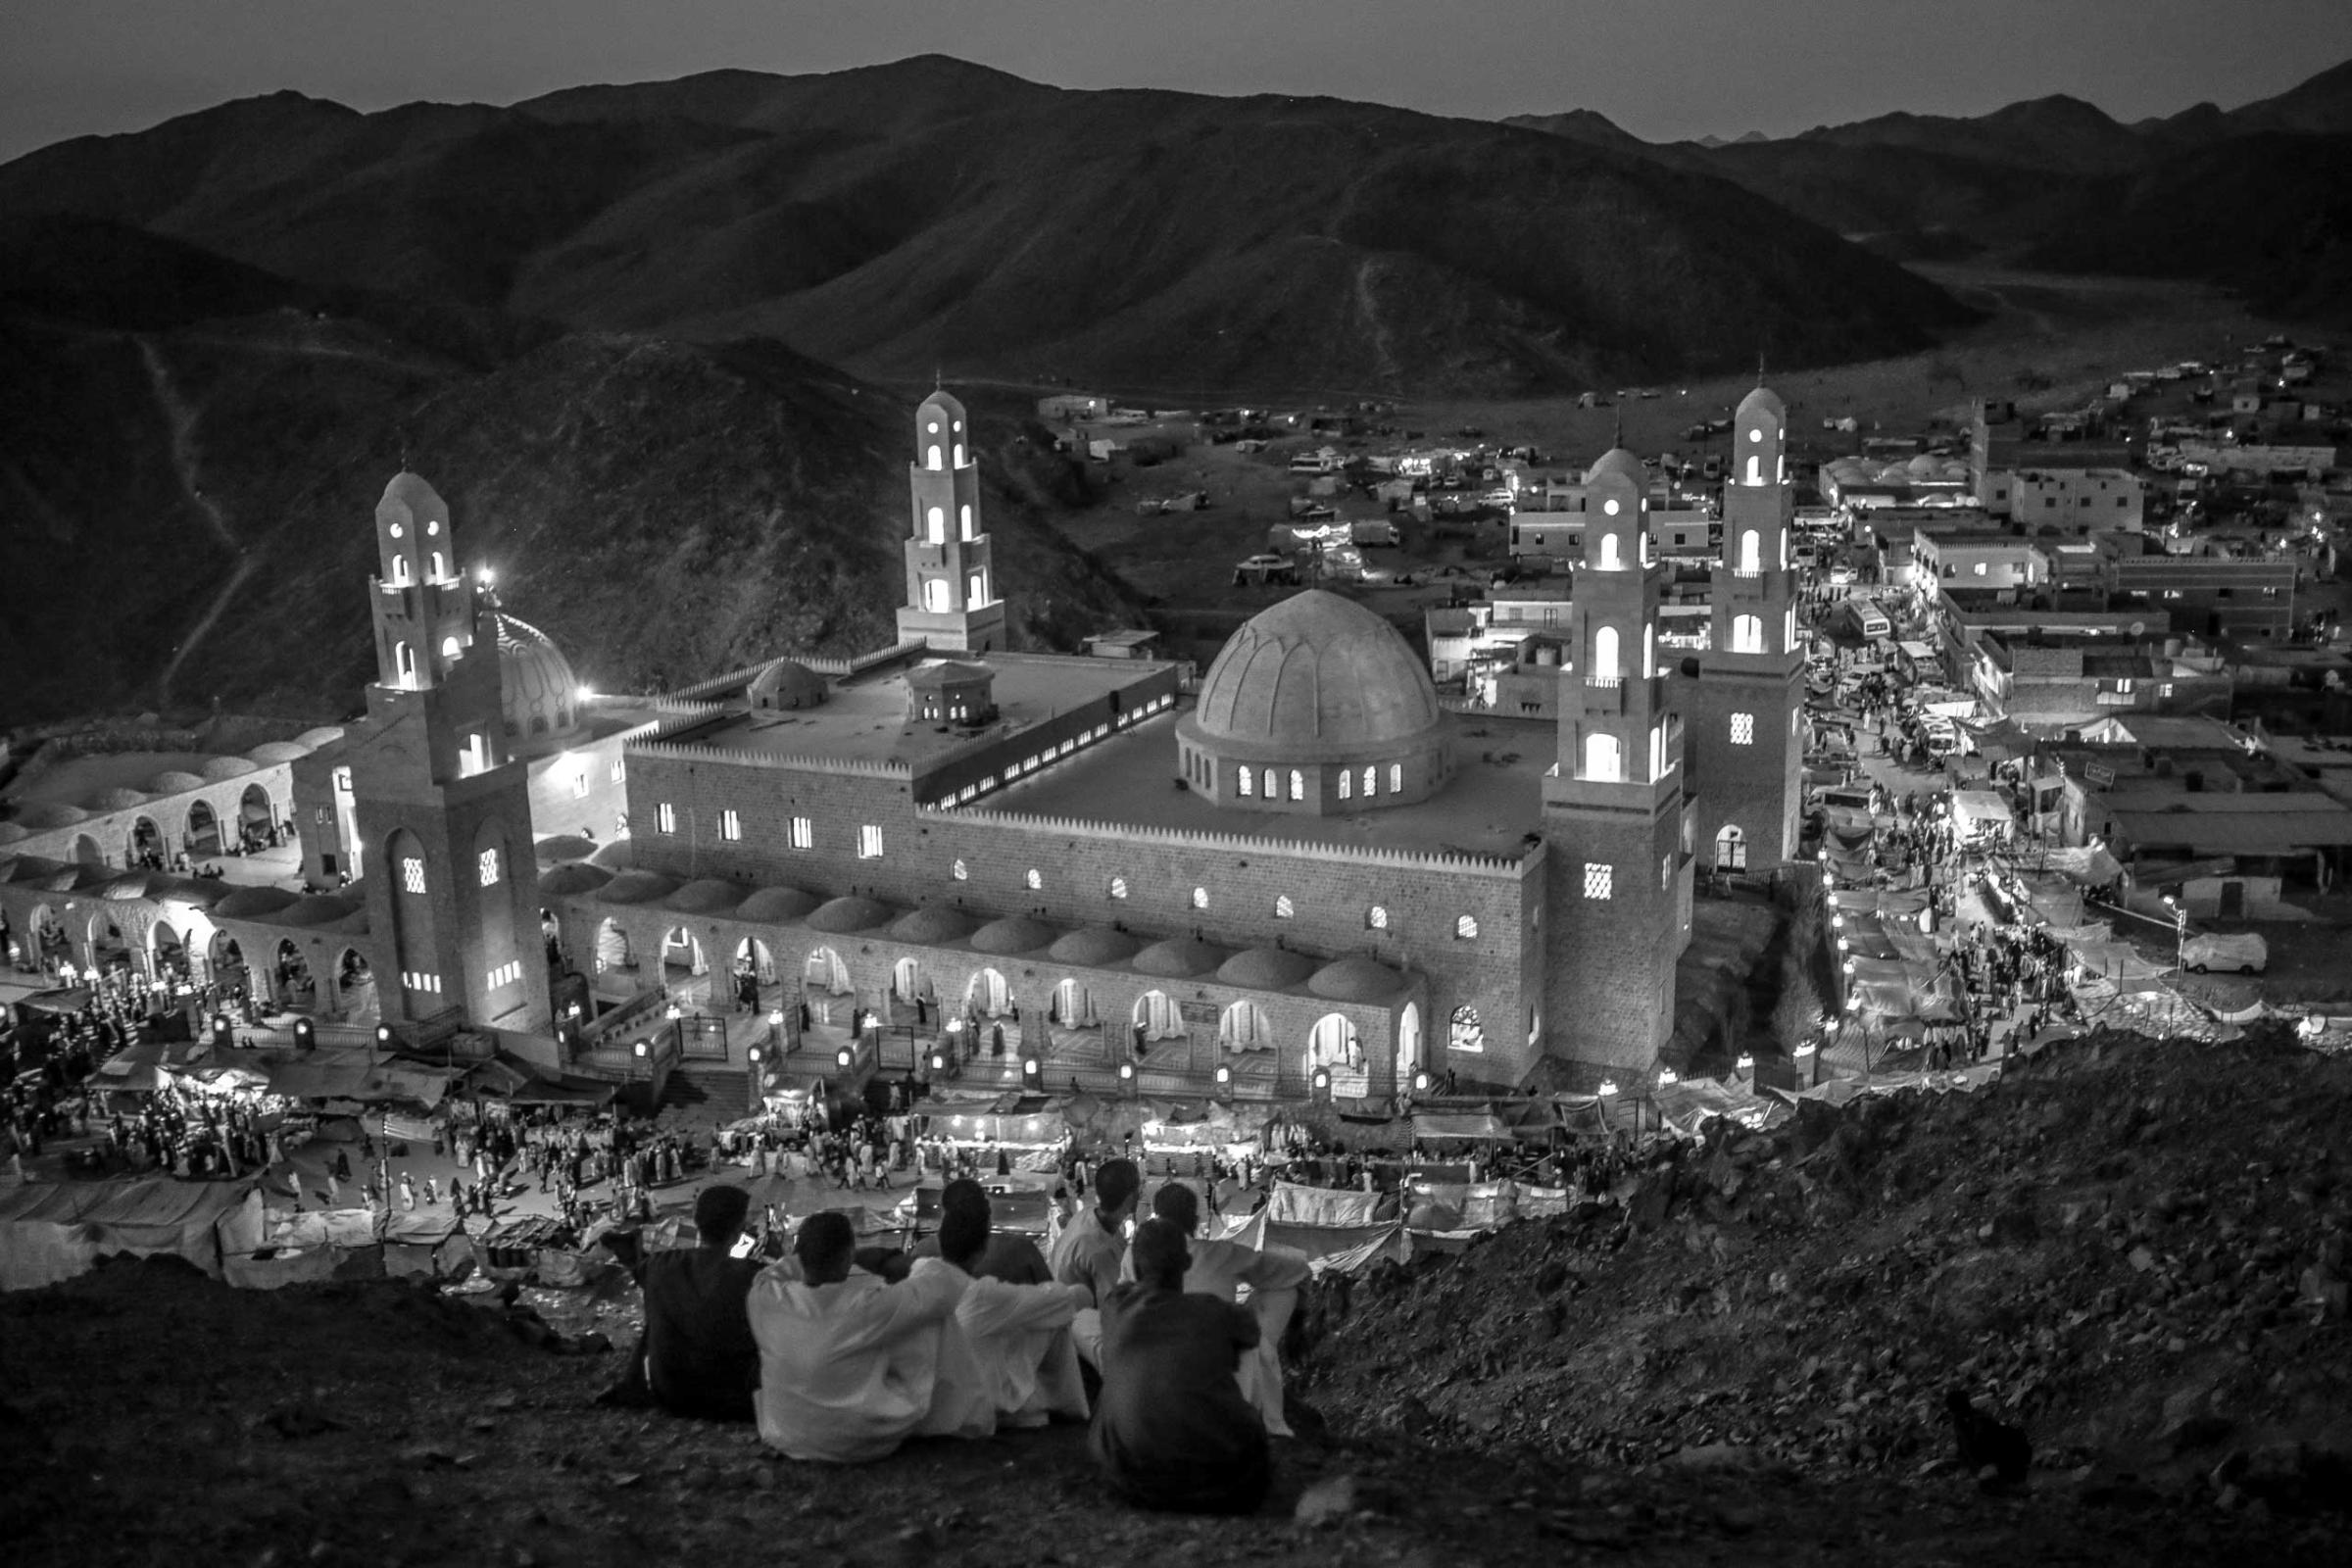 Sufi Muslims, mostly from upper Egypt, look onto the mosque of Abu-Alhassan Al-Shazly, one of the most influential Sufi scholar, during the annual celebration of his birth. El-Shazily's mosque is located in Humaythara, a remote valley and town in Egypt's Red Sea desert. Sept, 30, 2014.